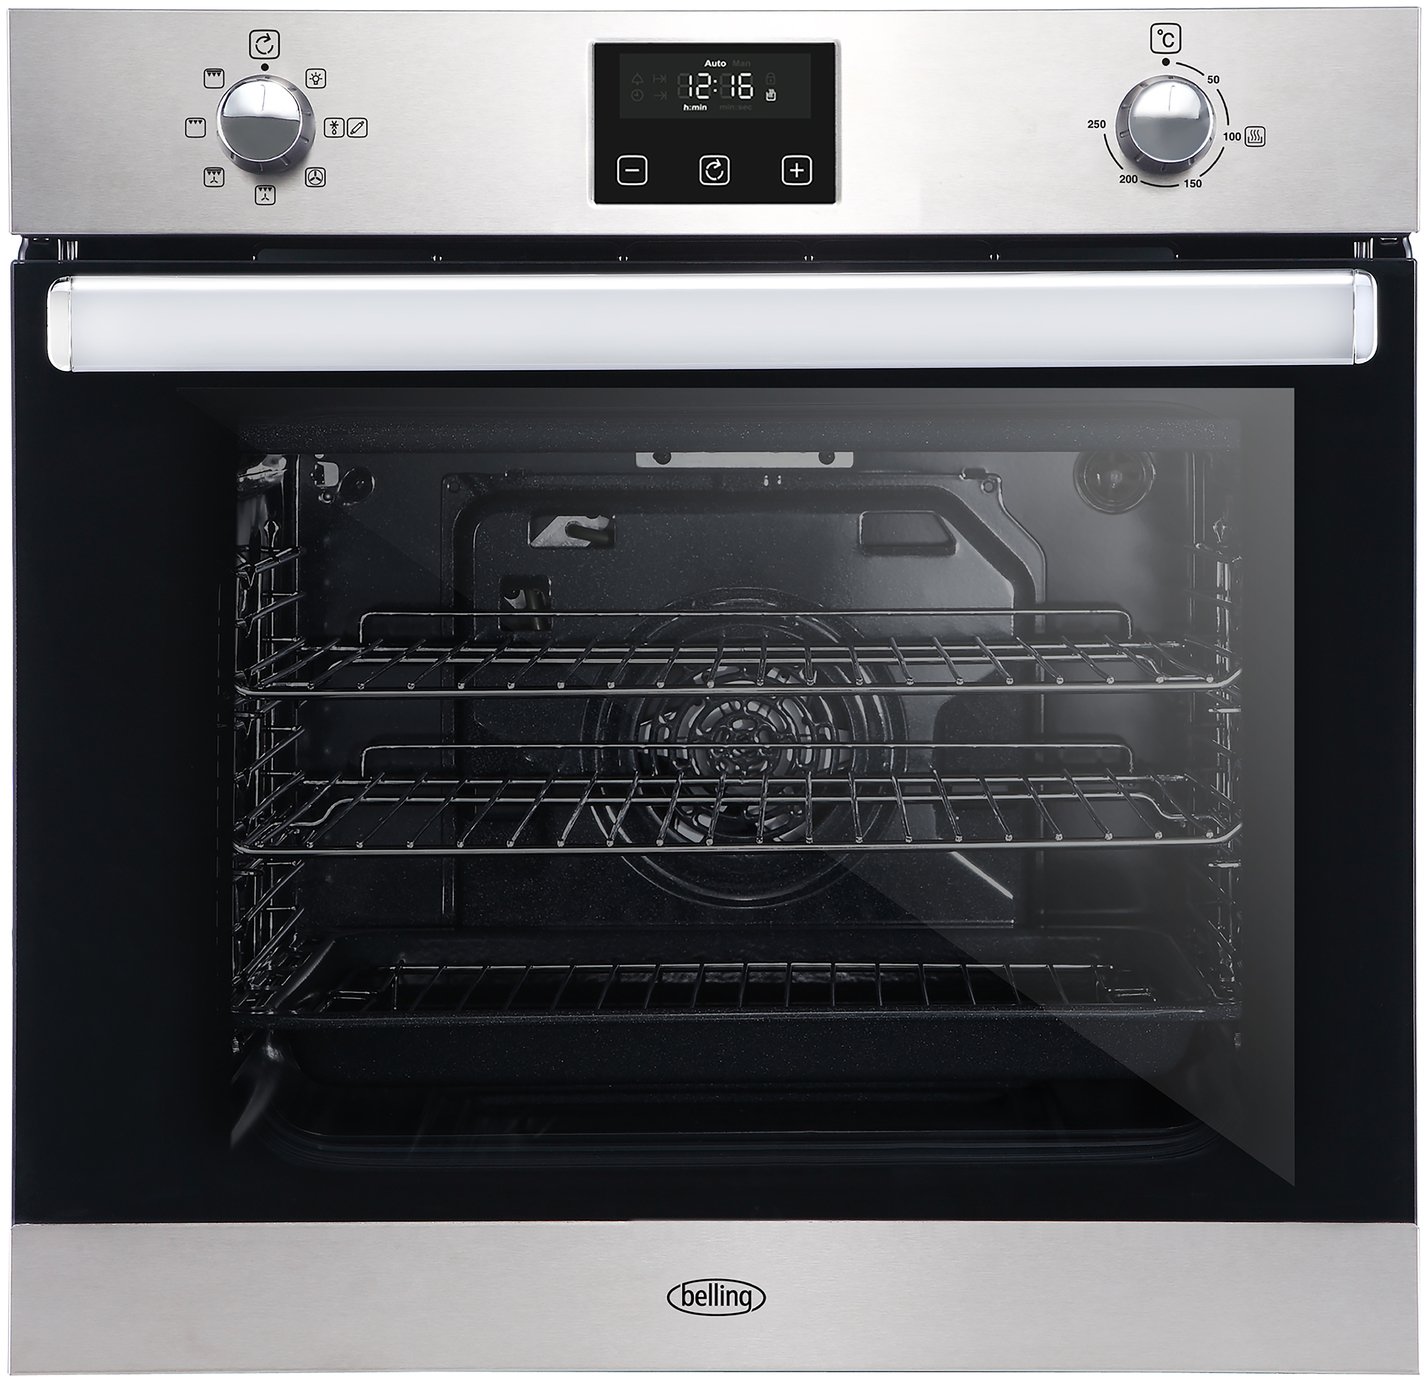 Belling BI602FP Built In Single Electric Oven review